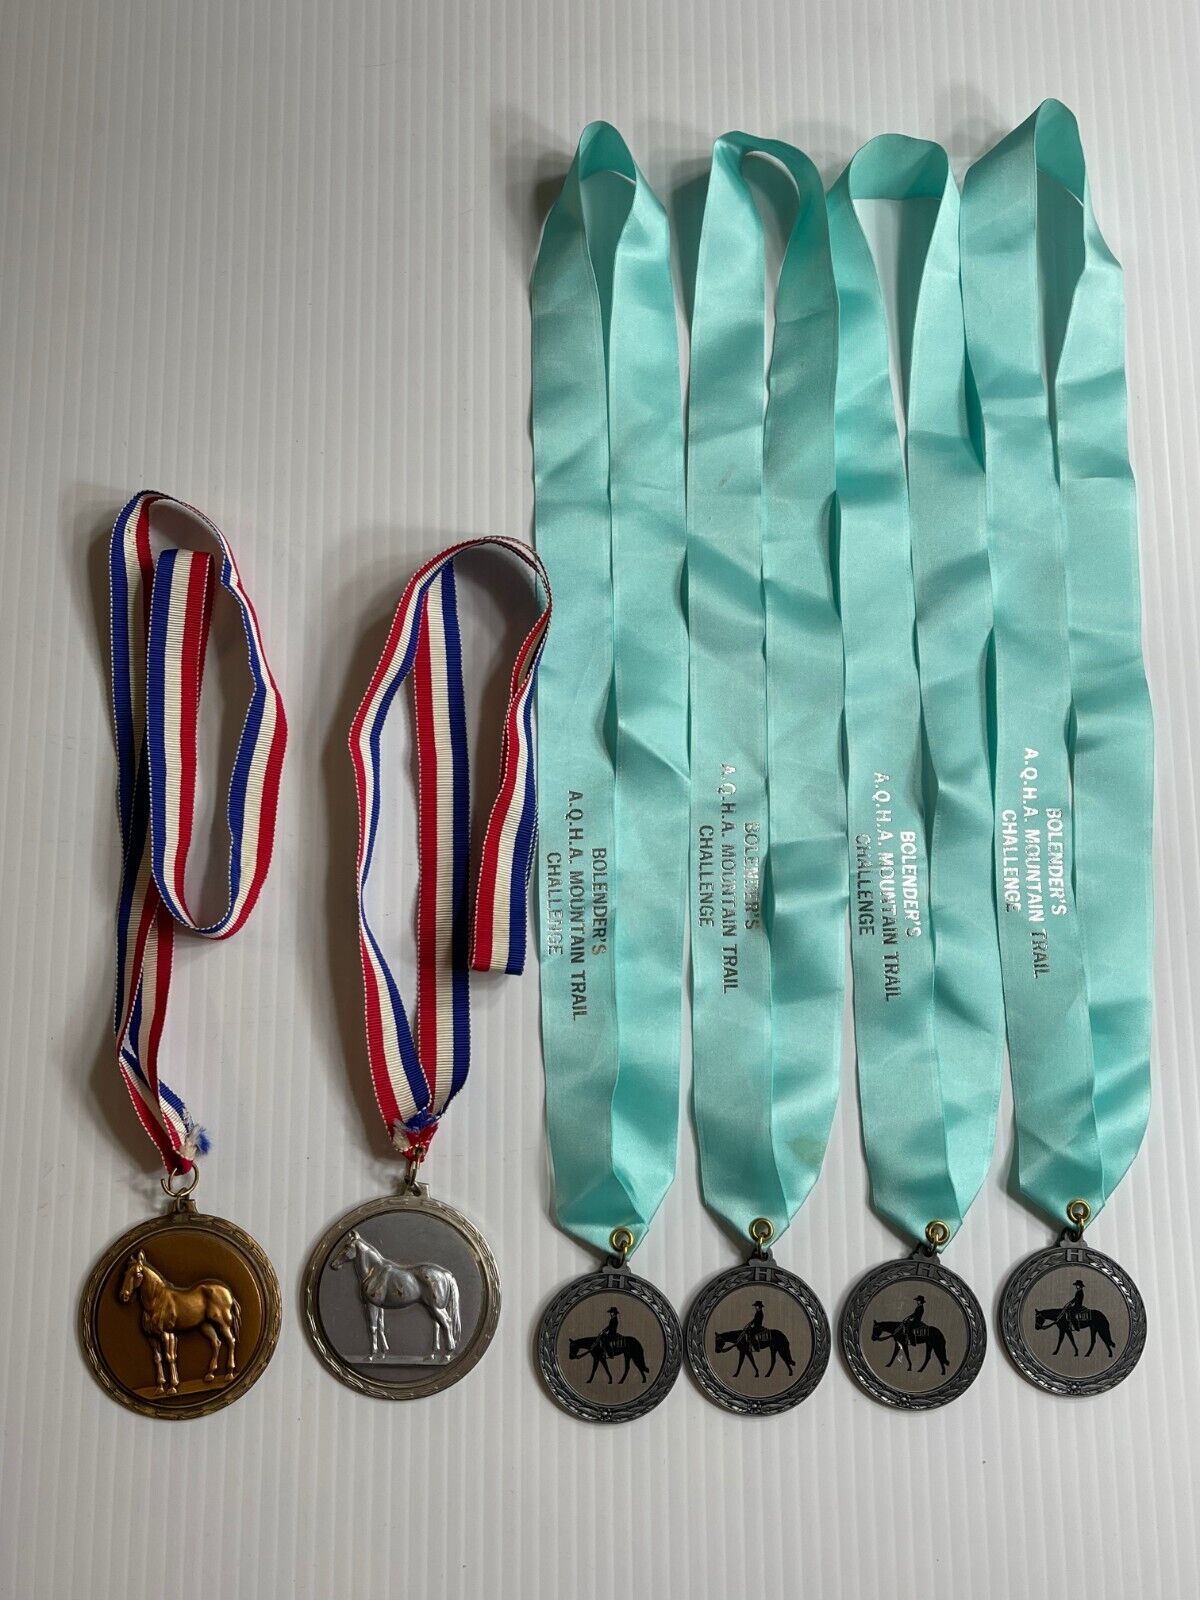 Horse Show Medals Lot of 6 - (Bareback / Fitting & Showing / A.Q.H.A Shows)